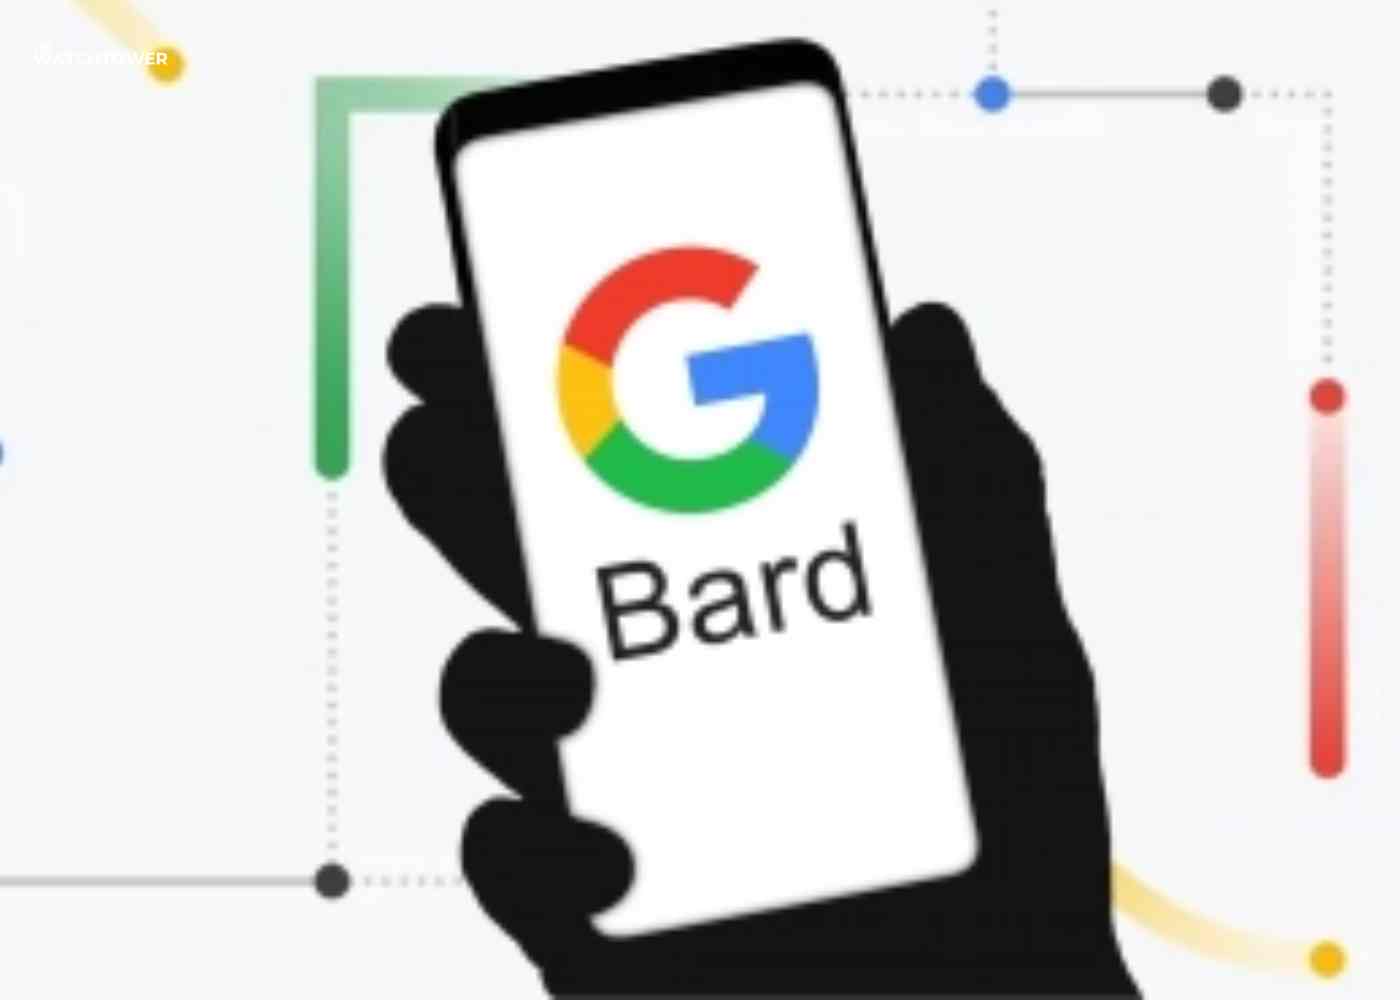 Should we trust Bard by Google after its error? 